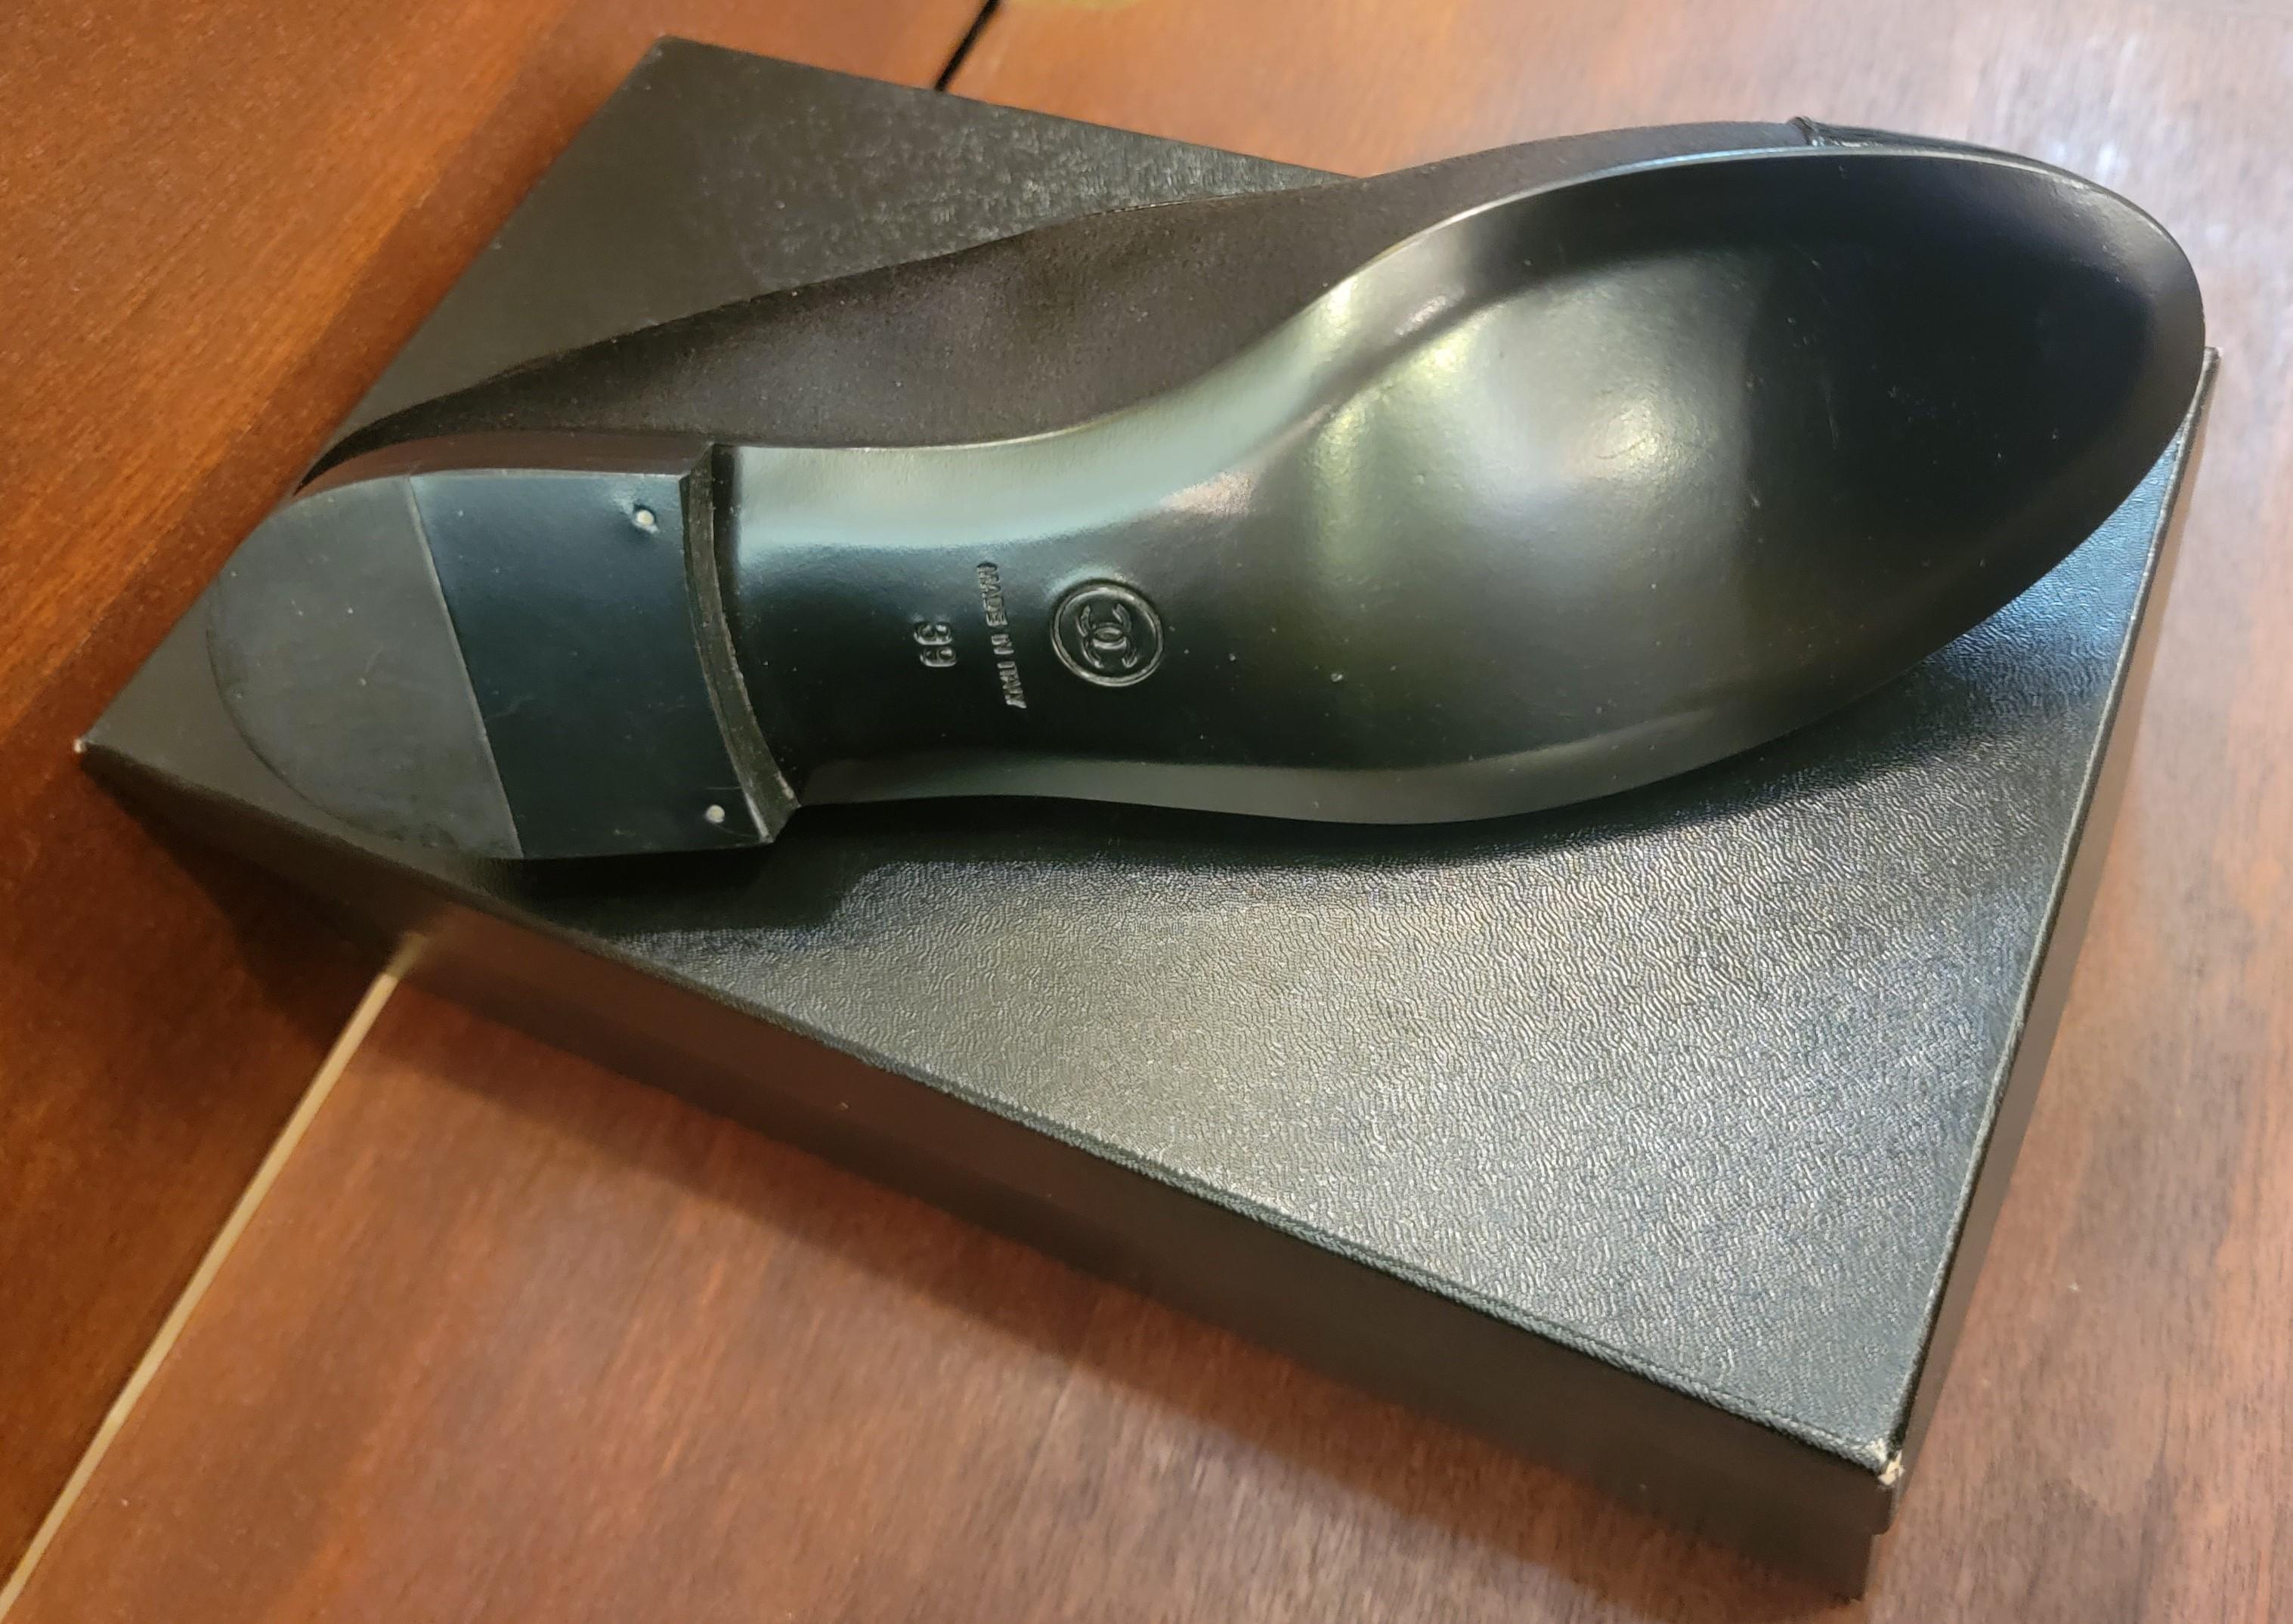 Authentic Brand New Chanel Black Balerina Flats Satin Leather Size 39 In New Condition For Sale In Pasadena, CA